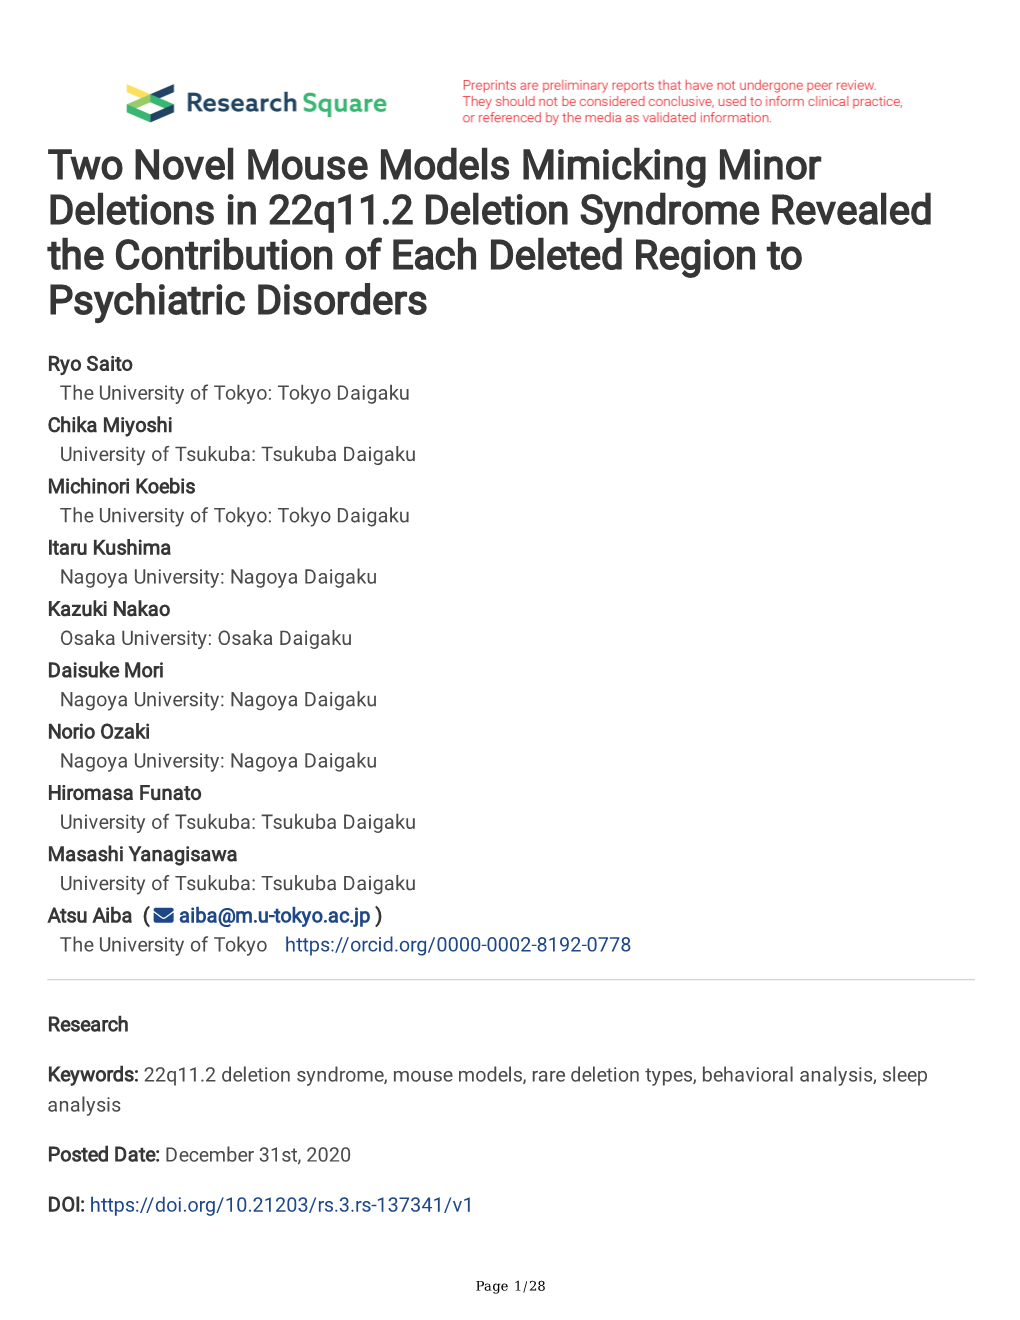 Two Novel Mouse Models Mimicking Minor Deletions in 22Q11.2 Deletion Syndrome Revealed the Contribution of Each Deleted Region to Psychiatric Disorders